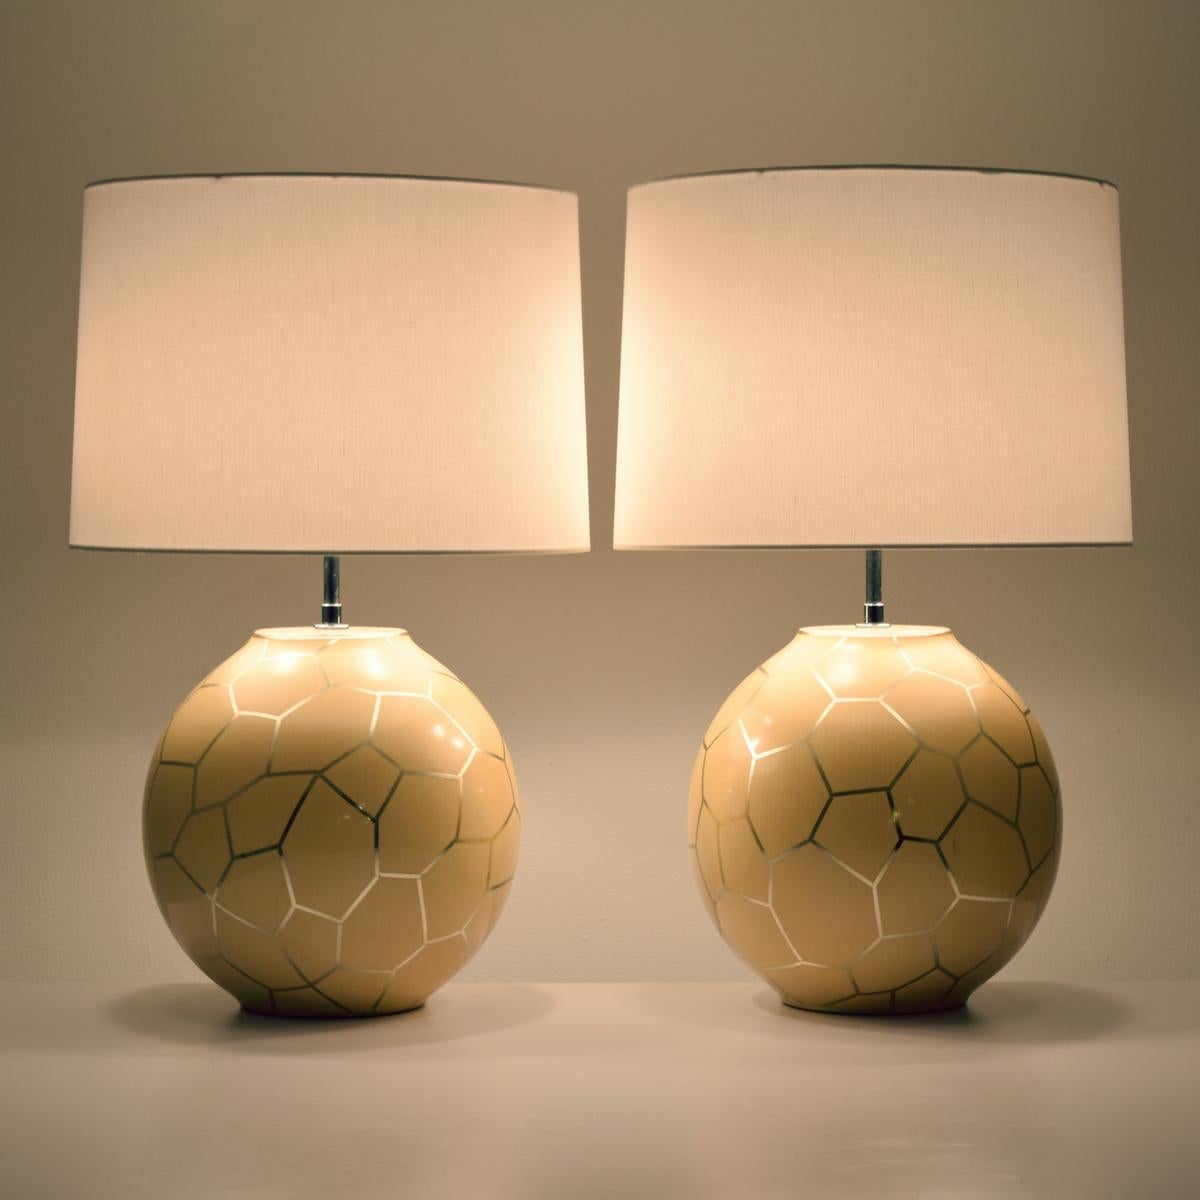 Pair of Karl Springer Lamps In Good Condition For Sale In West Palm Beach, FL